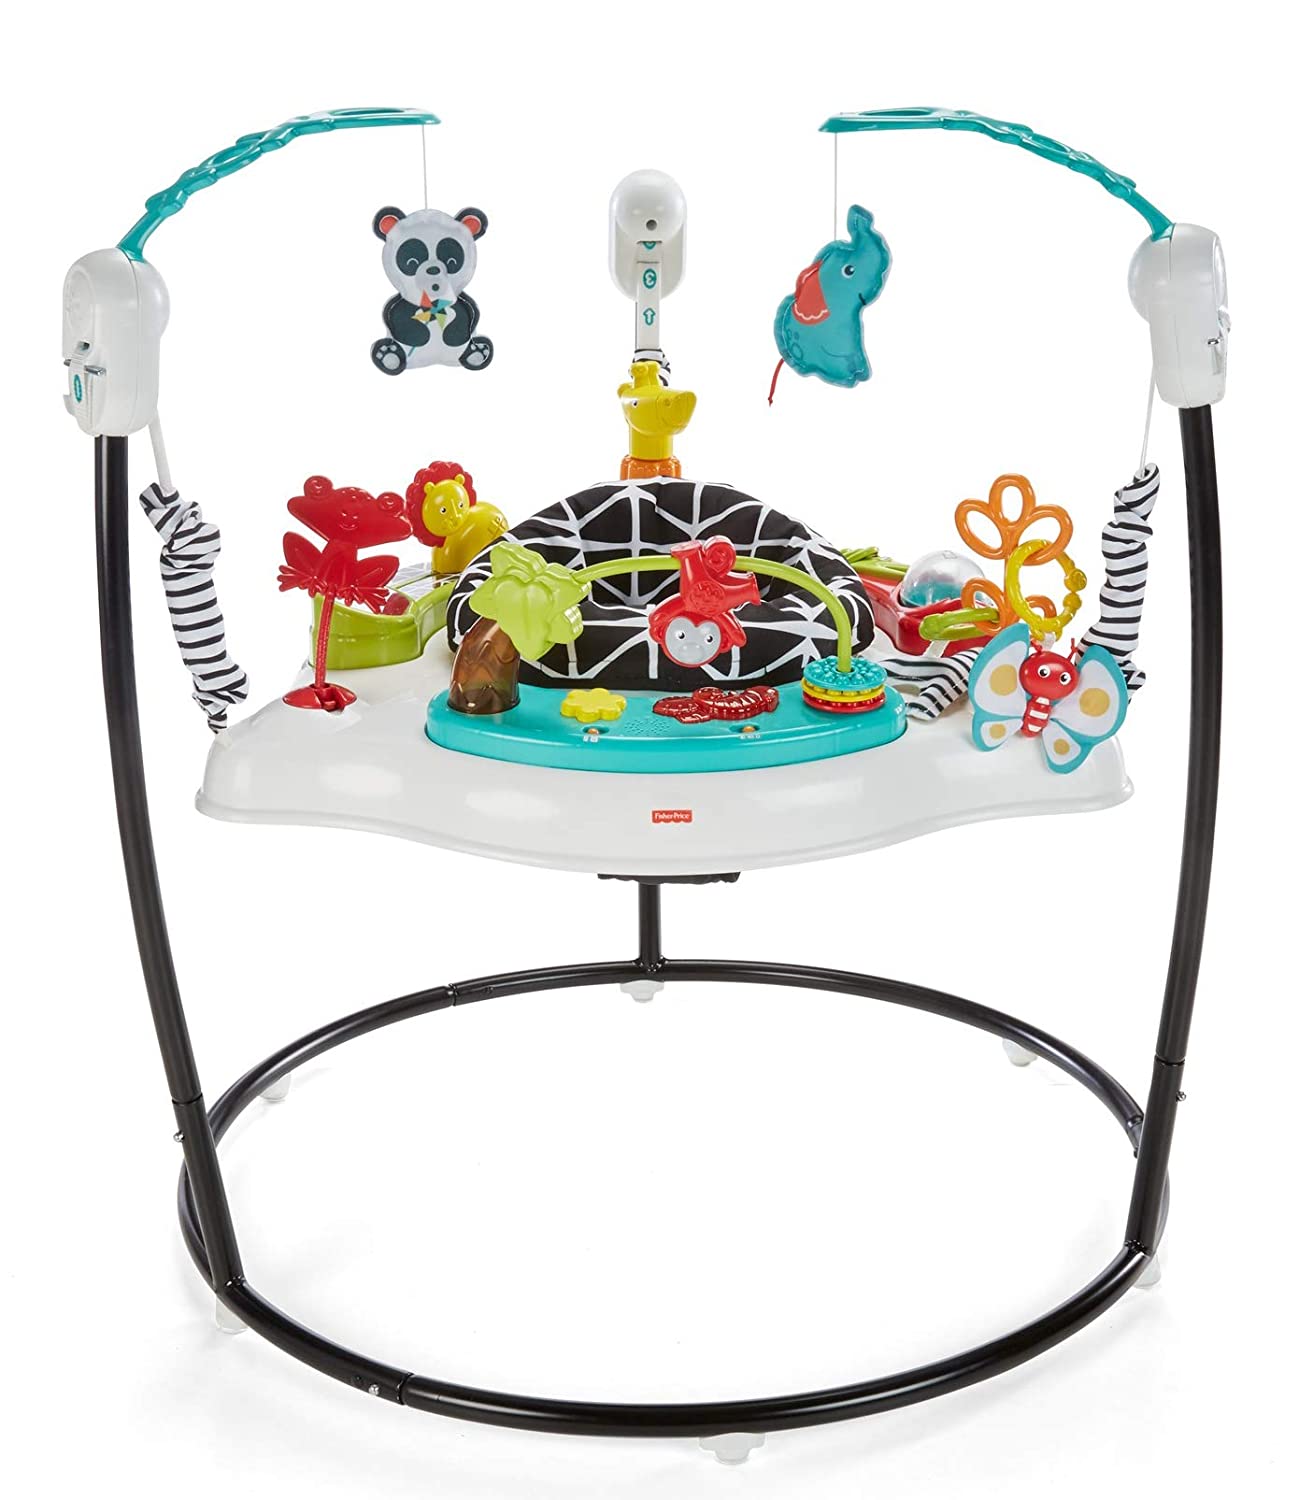 7 Best Fisher Price Jumperoo Reviews in 2023 2